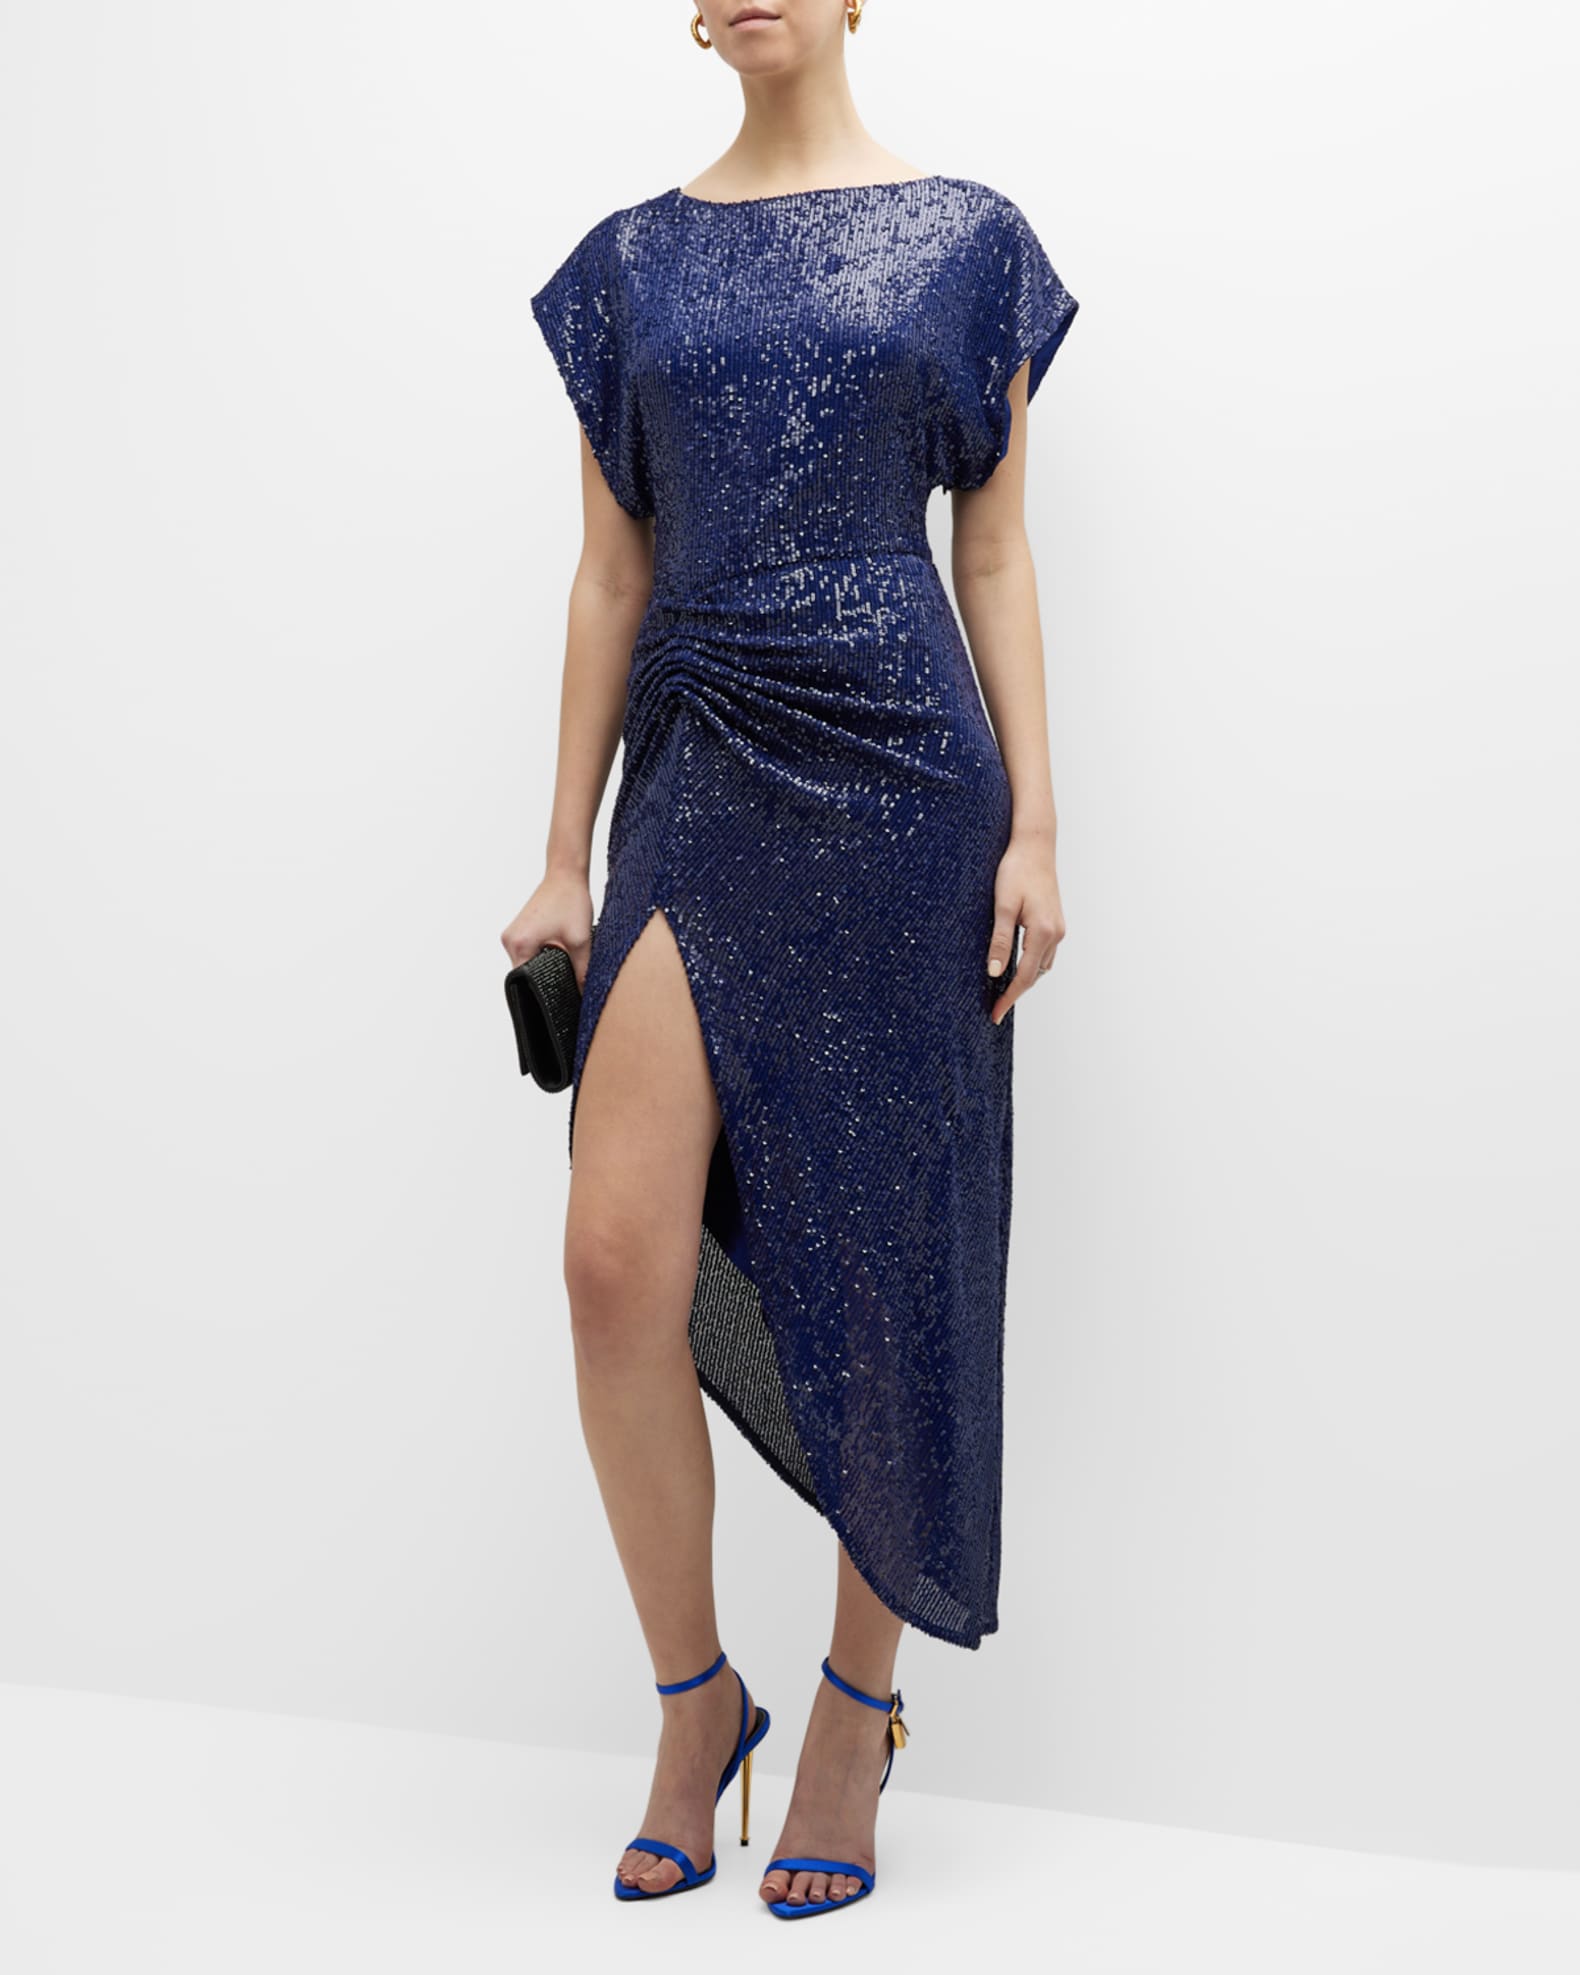 In the party mood with Another version, the sequins in this rich